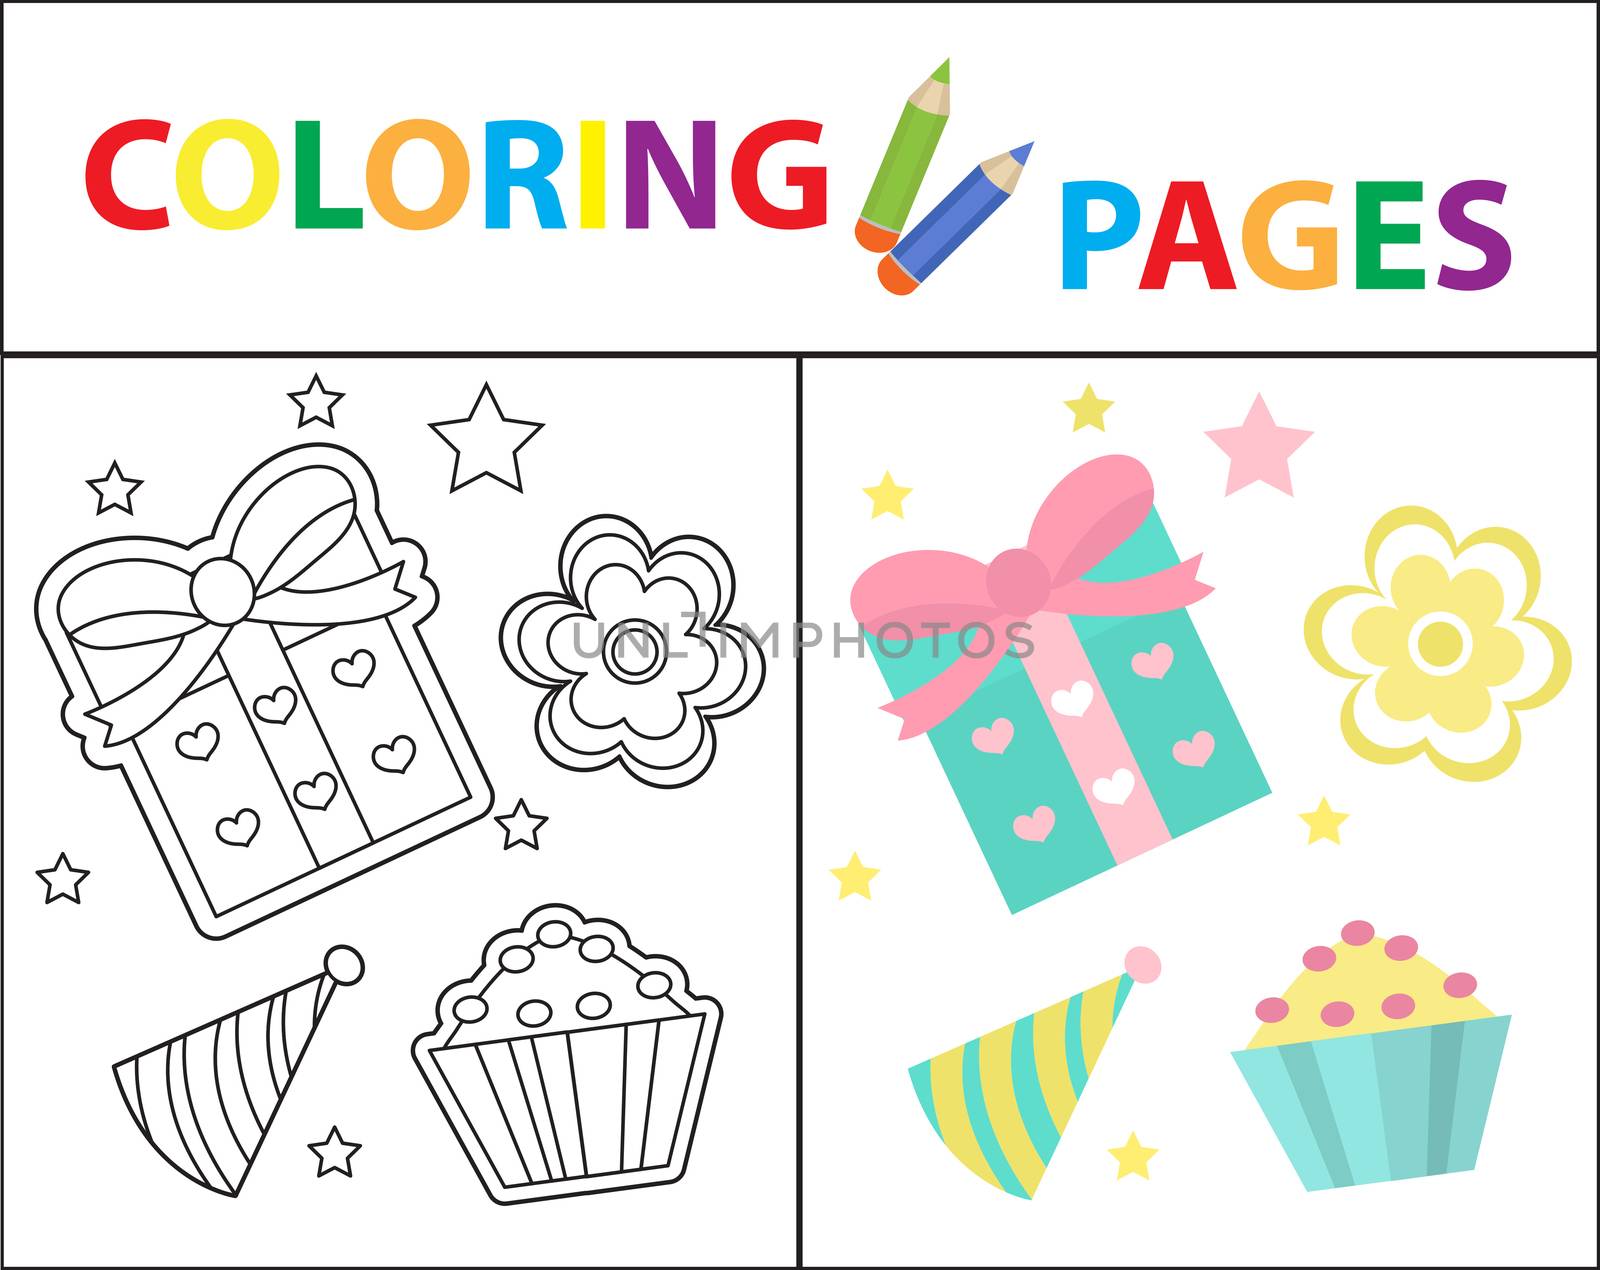 Coloring book page for kids. Birthday gift and cake set. Sketch outline and color version. Childrens education. illustration